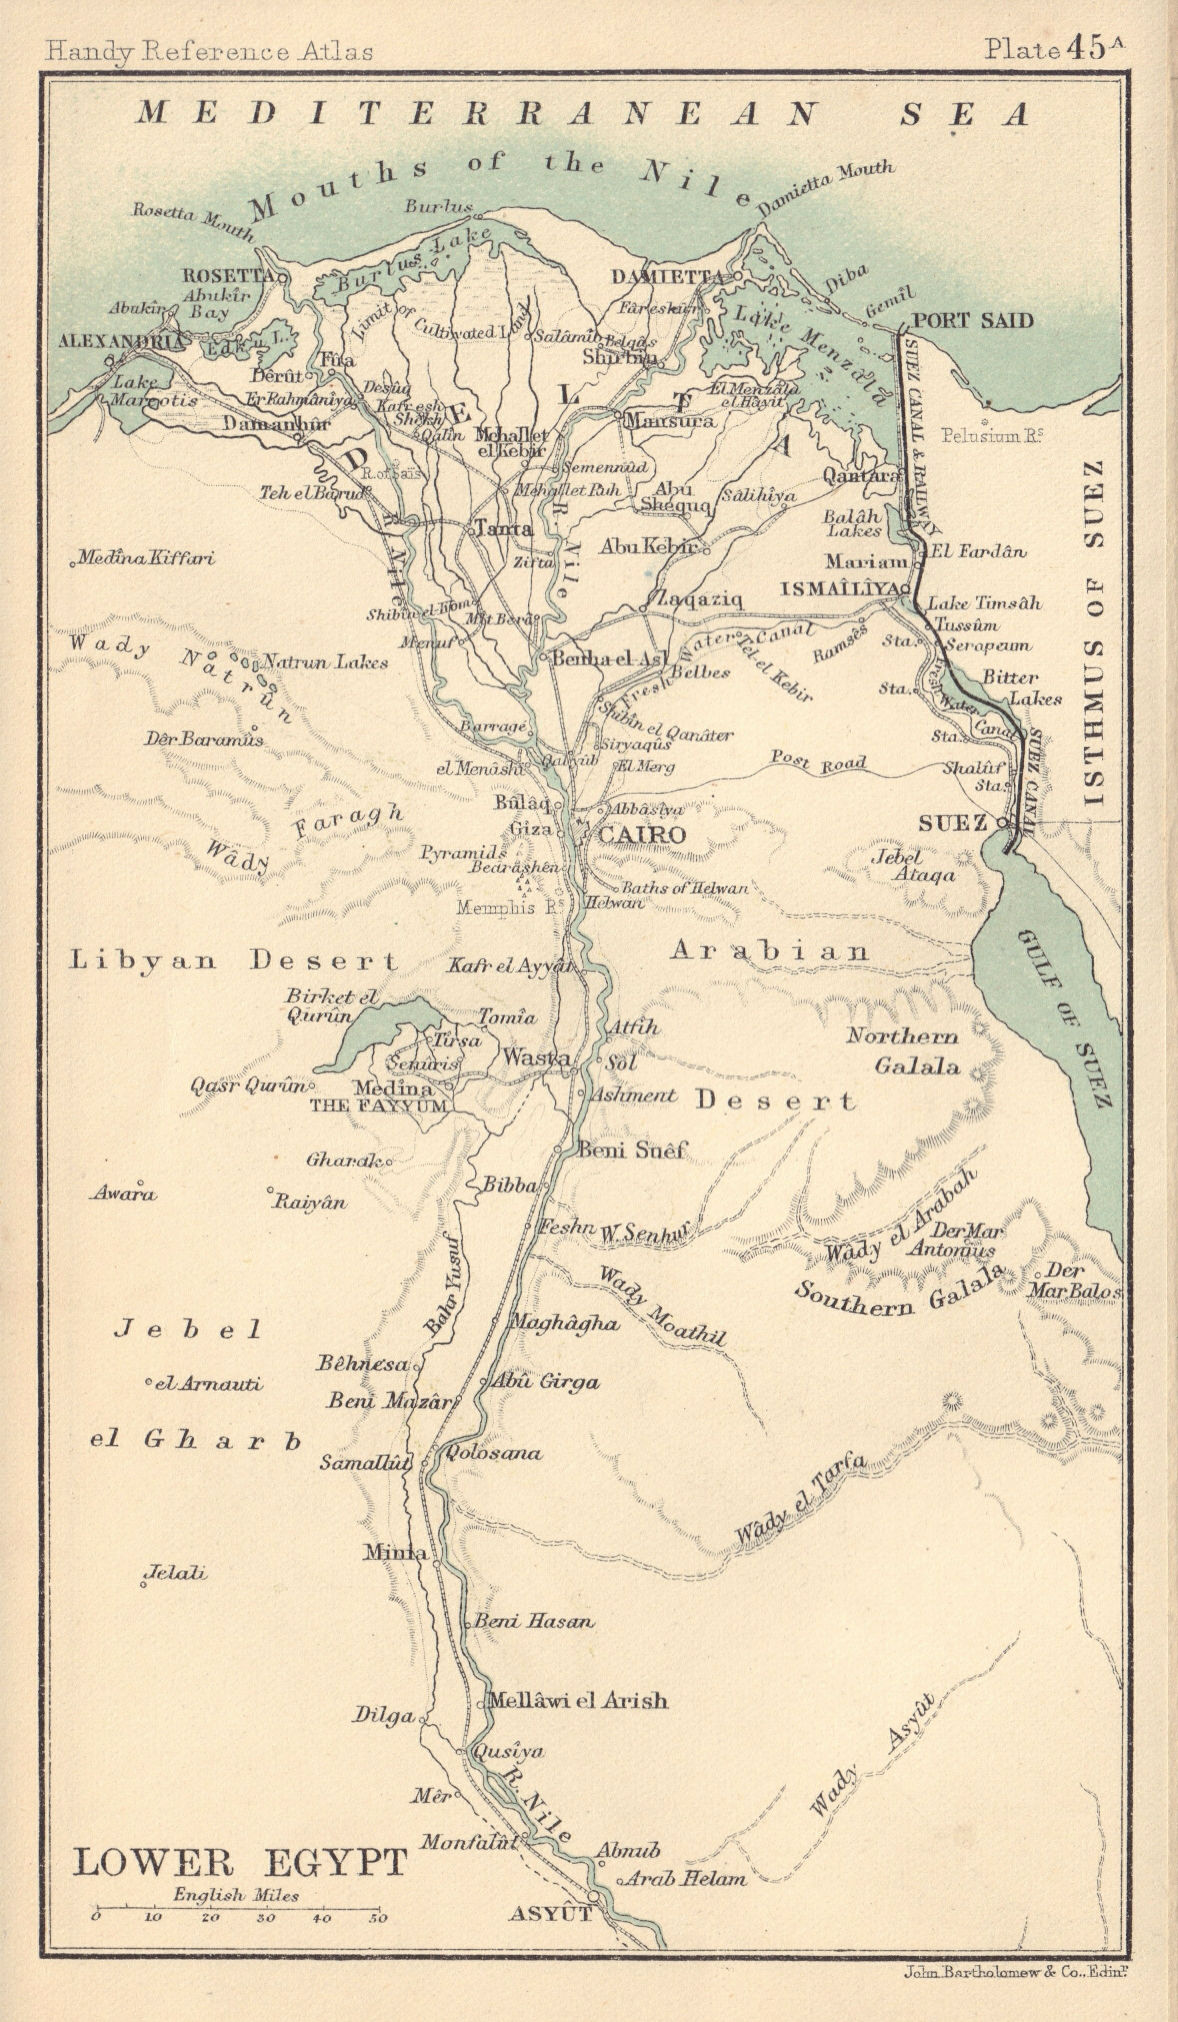 Associate Product Lower Egypt. Nile valley & delta. BARTHOLOMEW 1898 old antique map plan chart